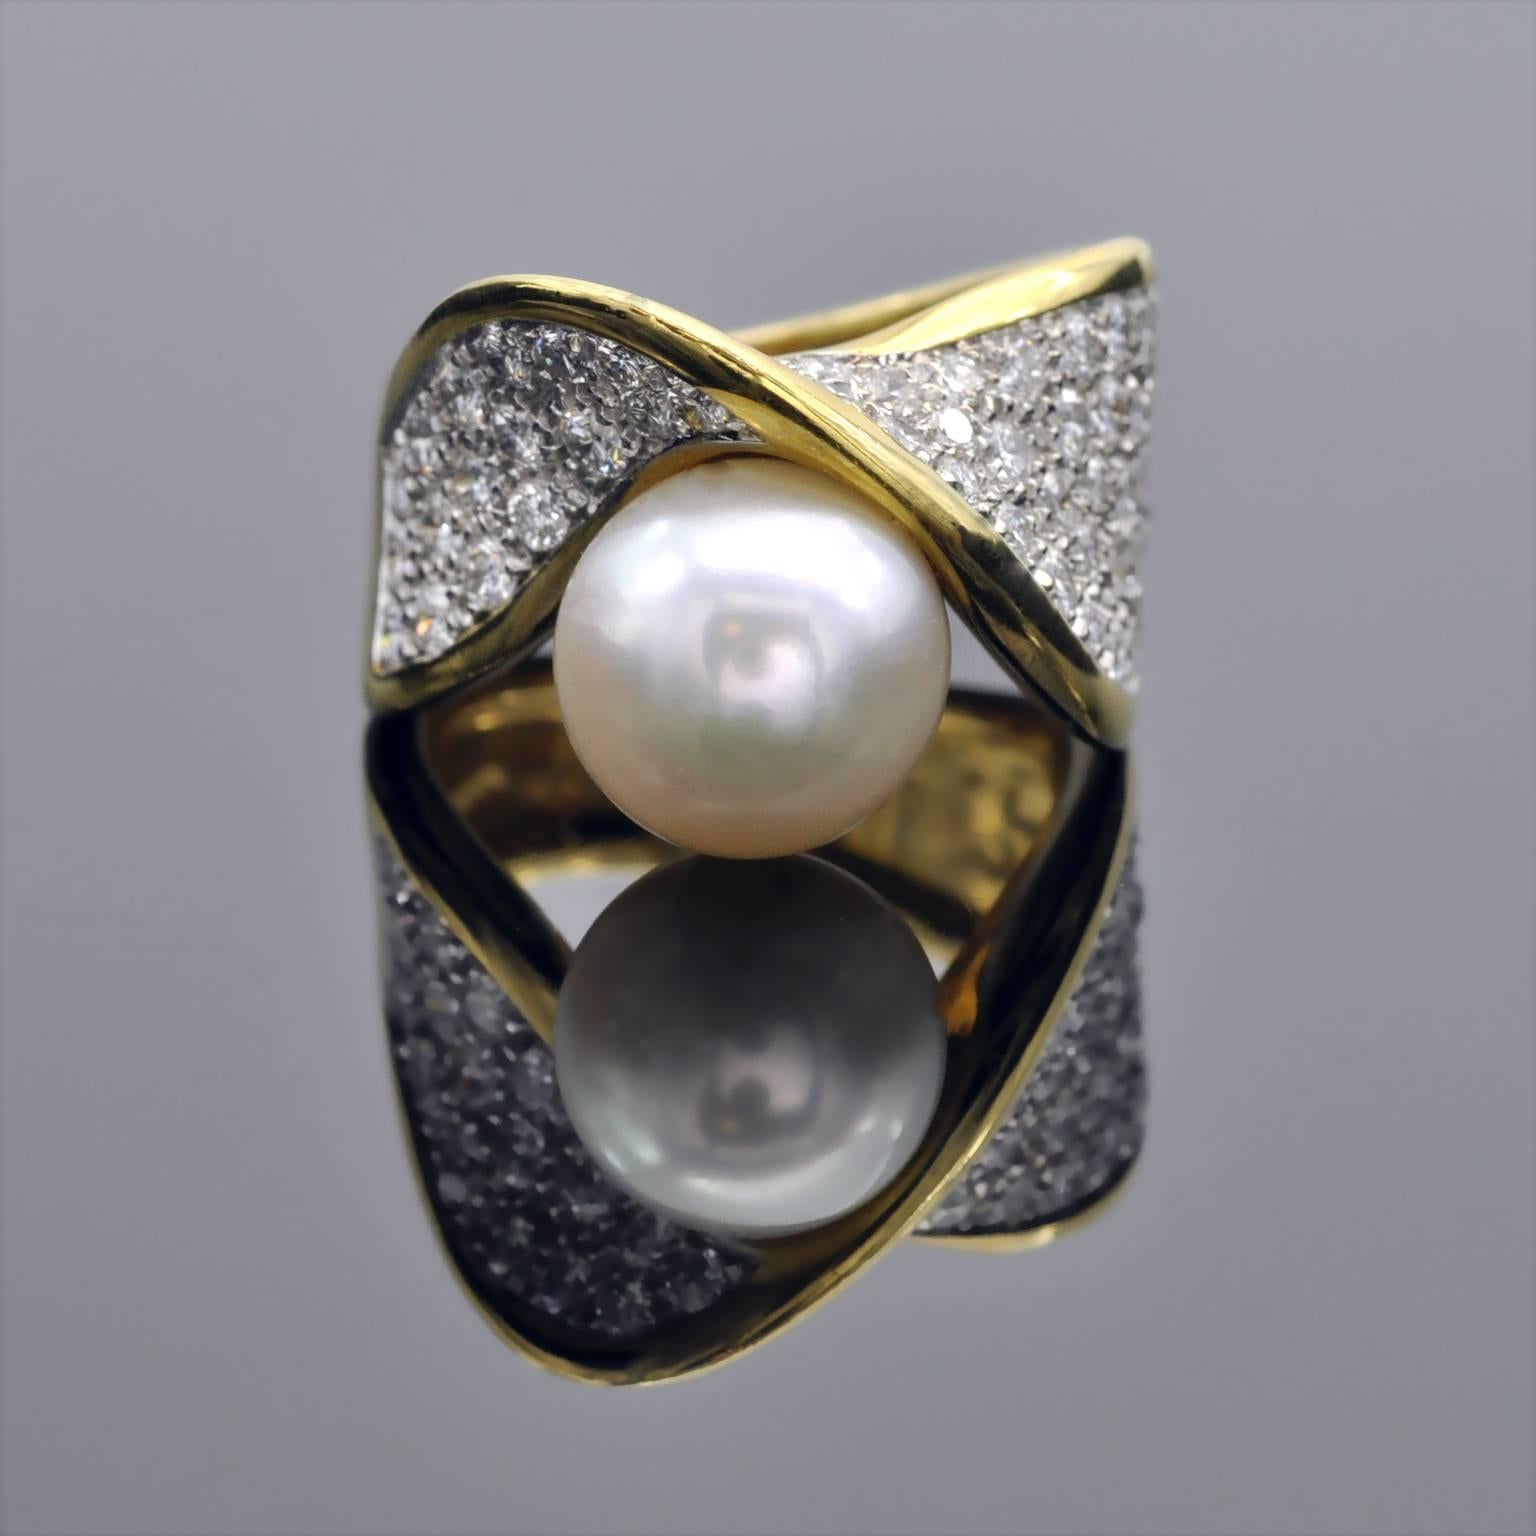 Attractive pearl ring by Mikawa, Damiani pearl jewelry collection. the band seems to be folded with a 10mm pearl nesting into it. while pavé set diamonds highlight the whole piece.
Diamonds ± 1.5 carats
Signed Mikawa , Damiani stamp, French and